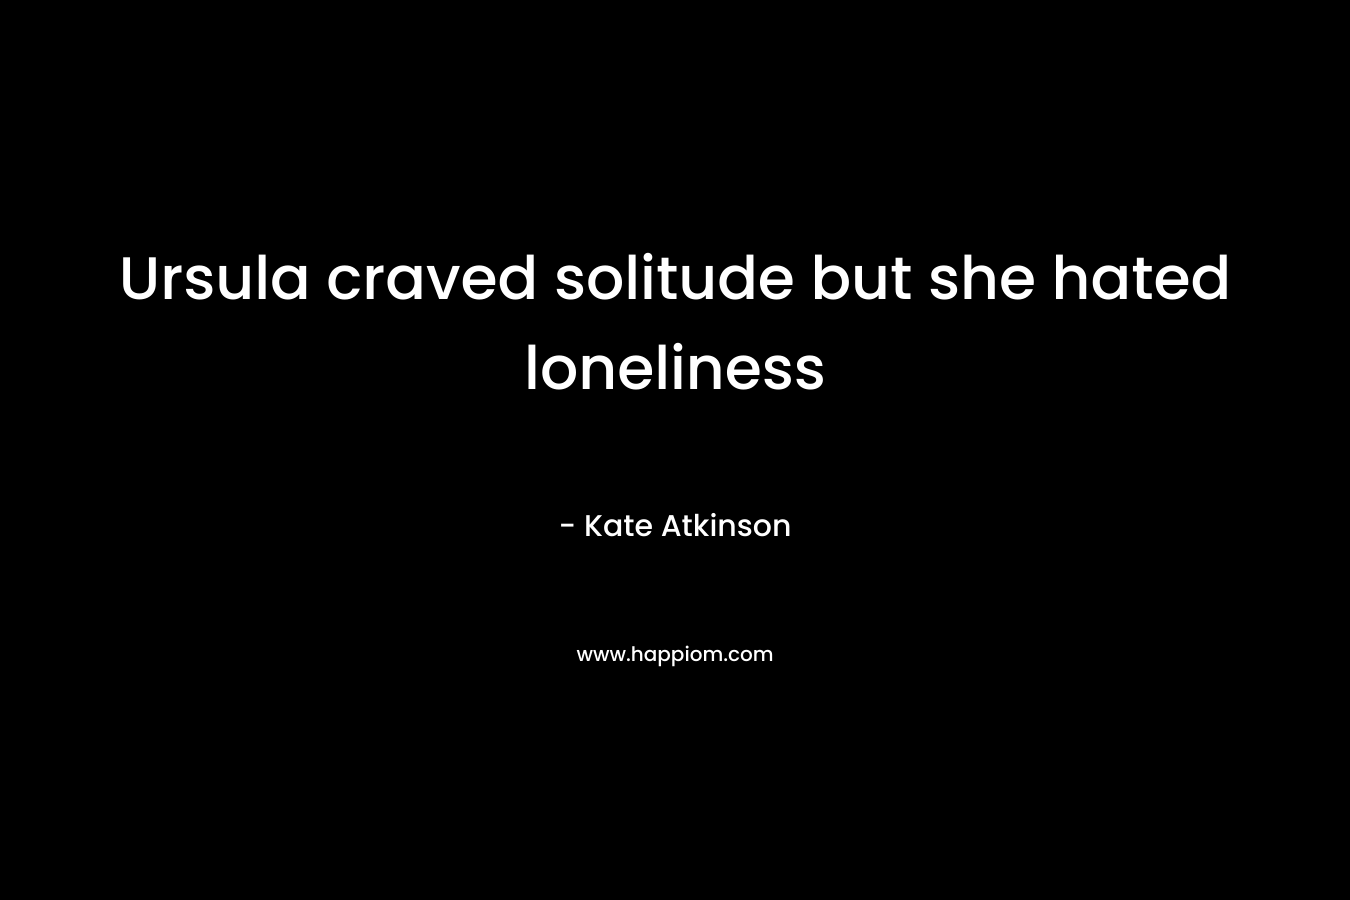 Ursula craved solitude but she hated loneliness